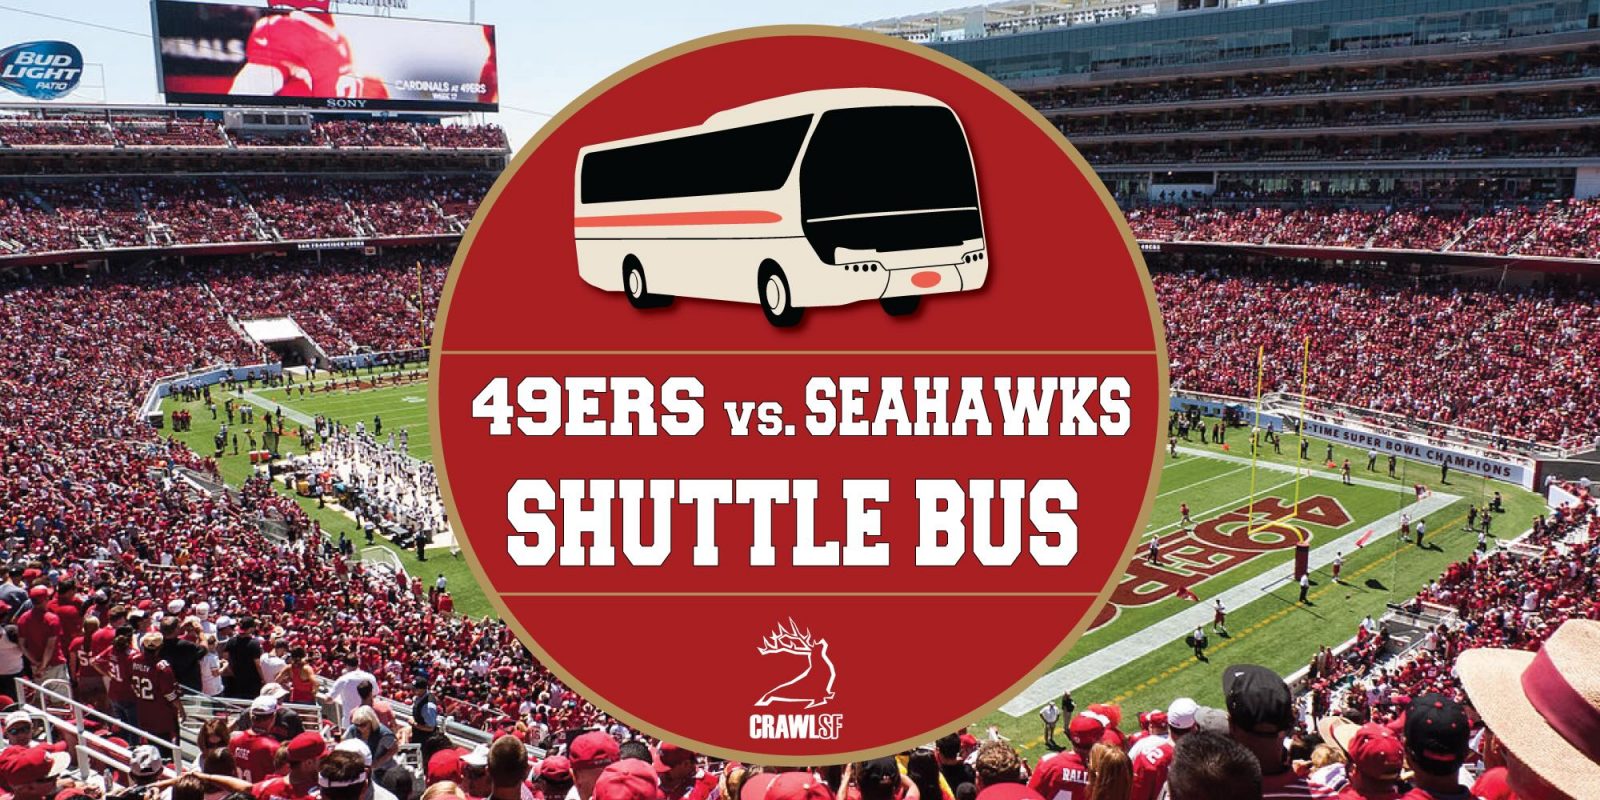 49ers vs. Seahawks Game at Levi's Stadium. Shuttle Bus Transportation from SF